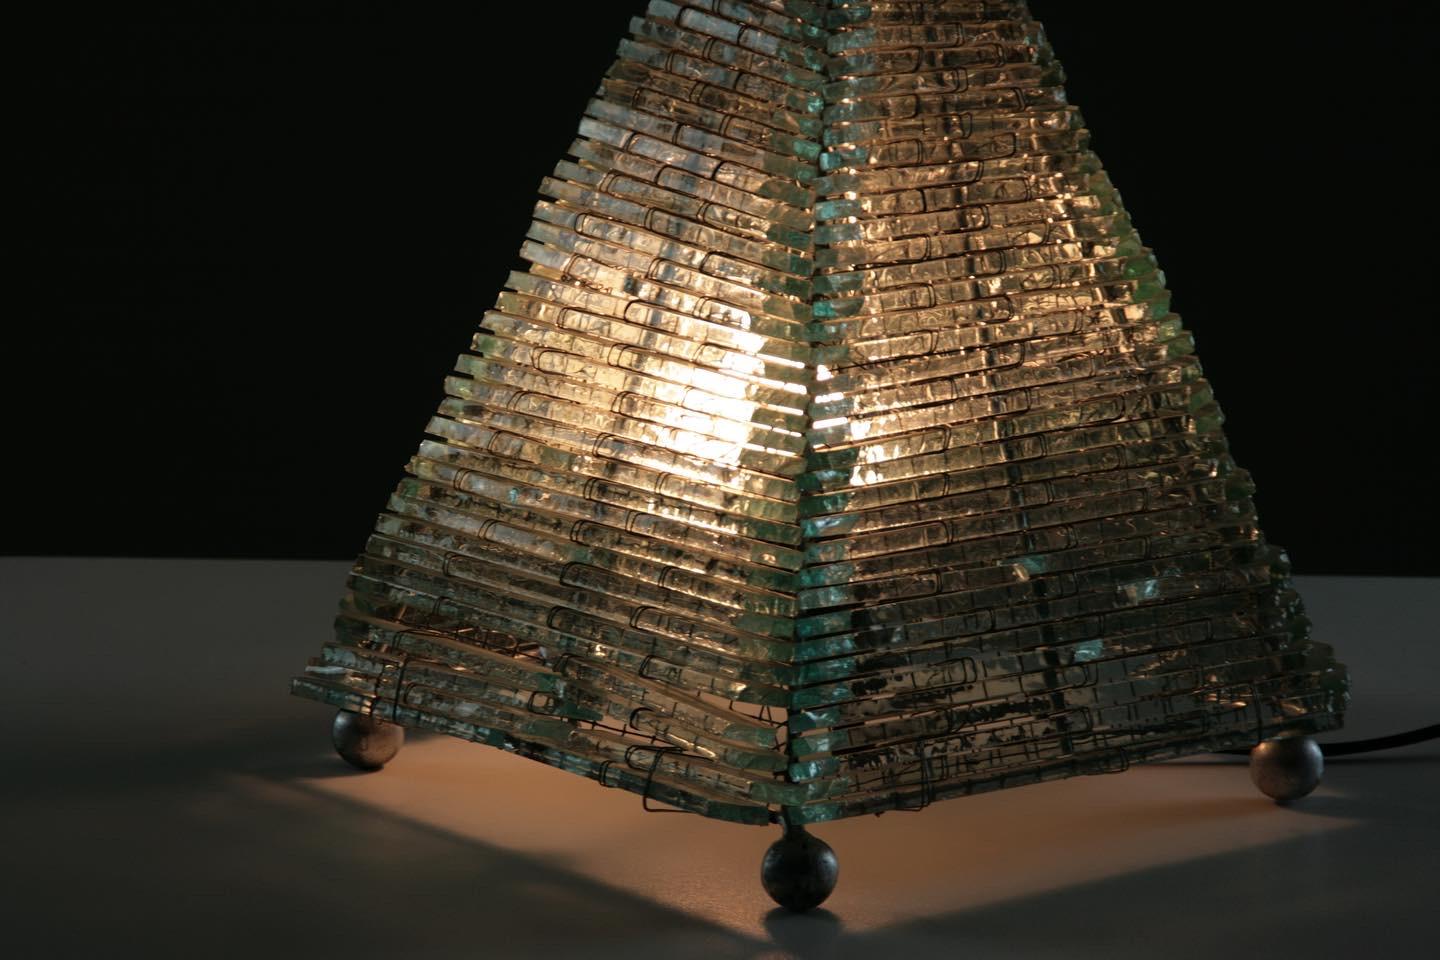 Table lamp in the shape of a pyramid and dating from the 1970s. Structure in pieces of glass and metal. Two pieces are missing on the base of one side, not very visible.
Dimensions: L22 x D22 x H32 cm